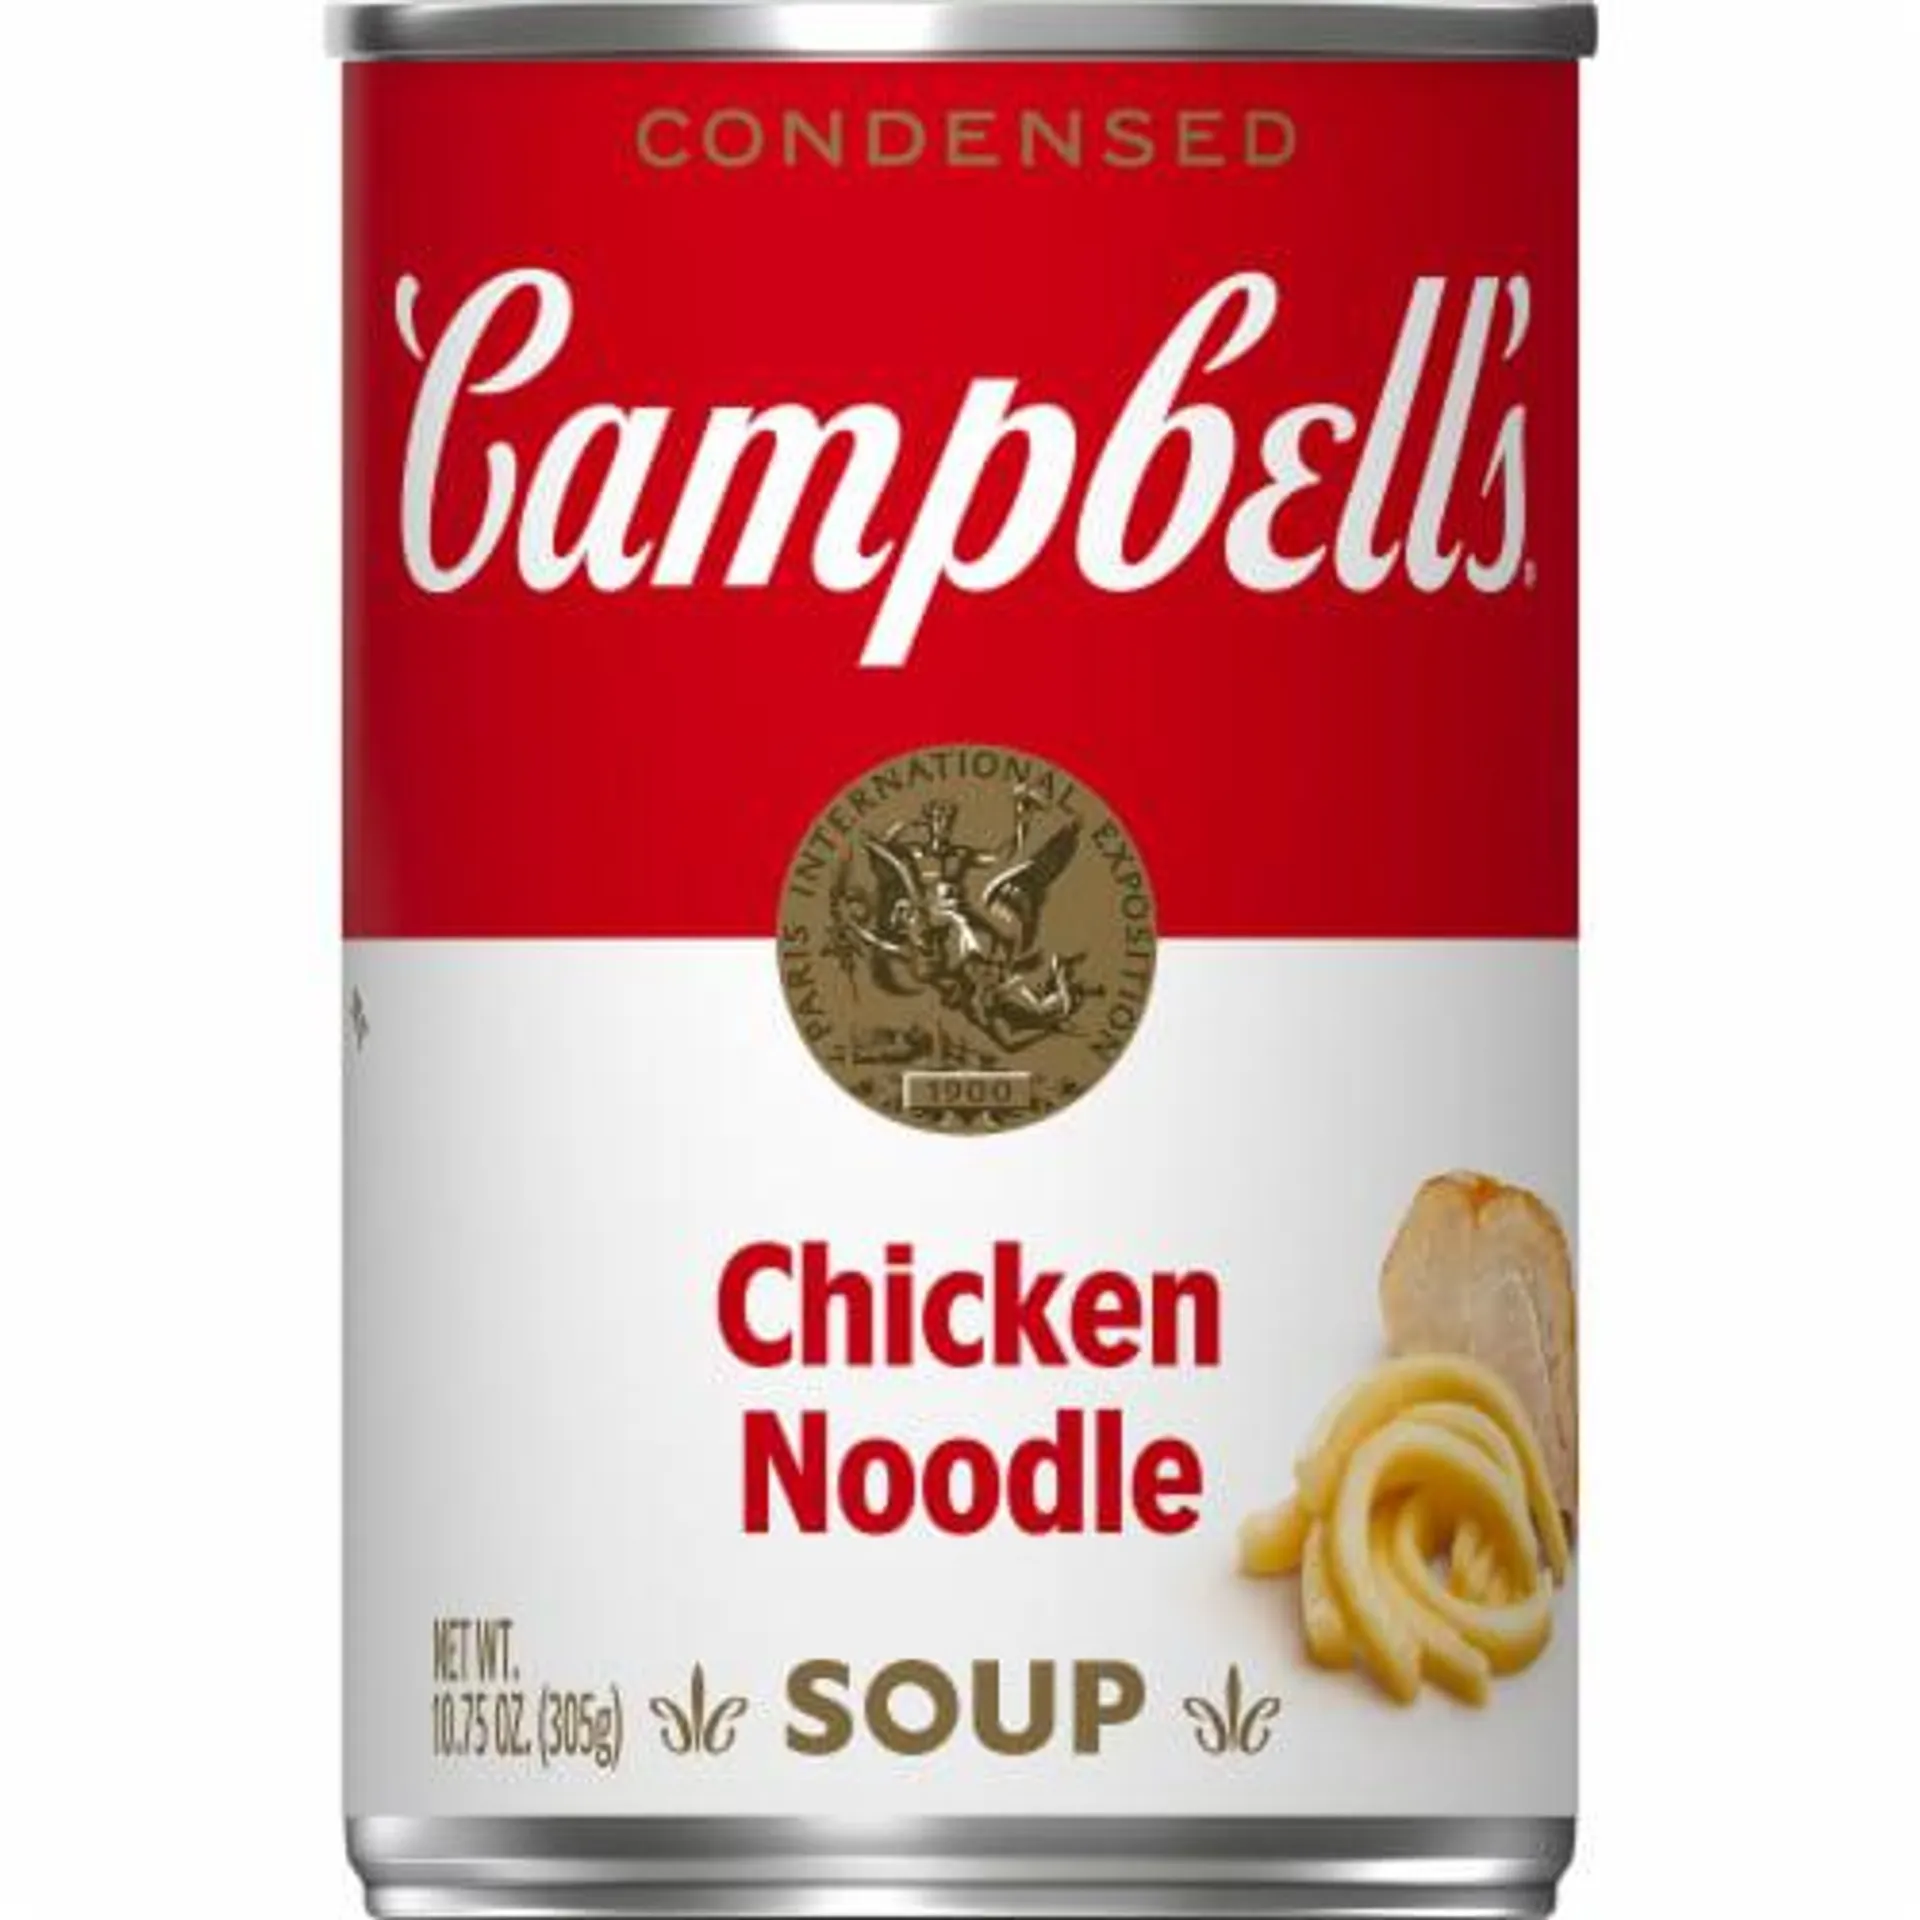 Campbell's® Condensed Chicken Noodle Soup